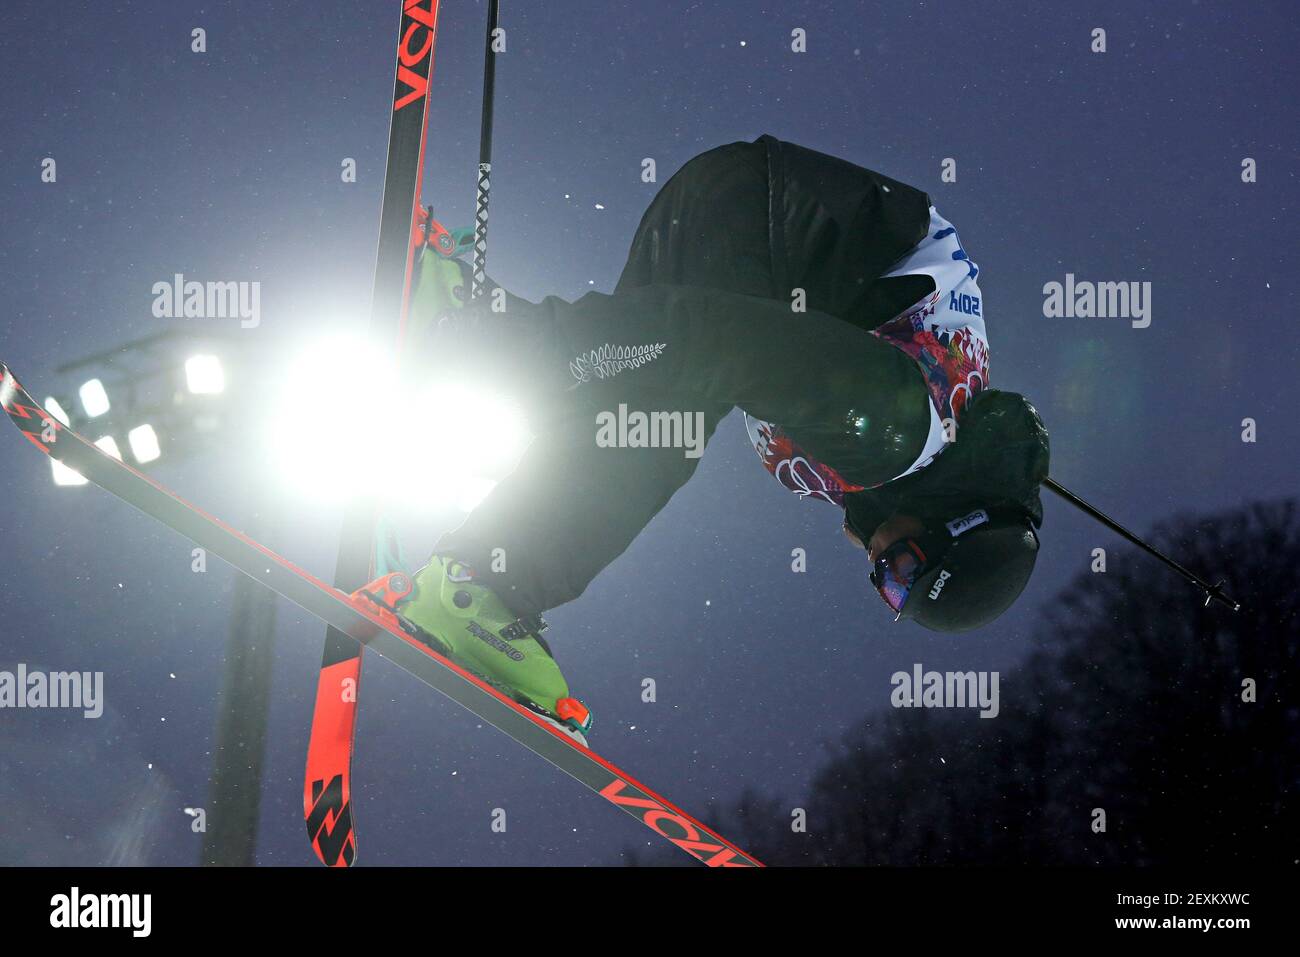 Lyndon Sheehan of New Zealand competes in qualifying for the men's ski halfpipe at Rosa Khutor Extreme Park during the Winter Olympics in Sochi, Russia, Tuesday, Feb. 18, 2014. (Photo by Brian Cassella/Chicago Tribune/MCT/Sipa USA) Stock Photo